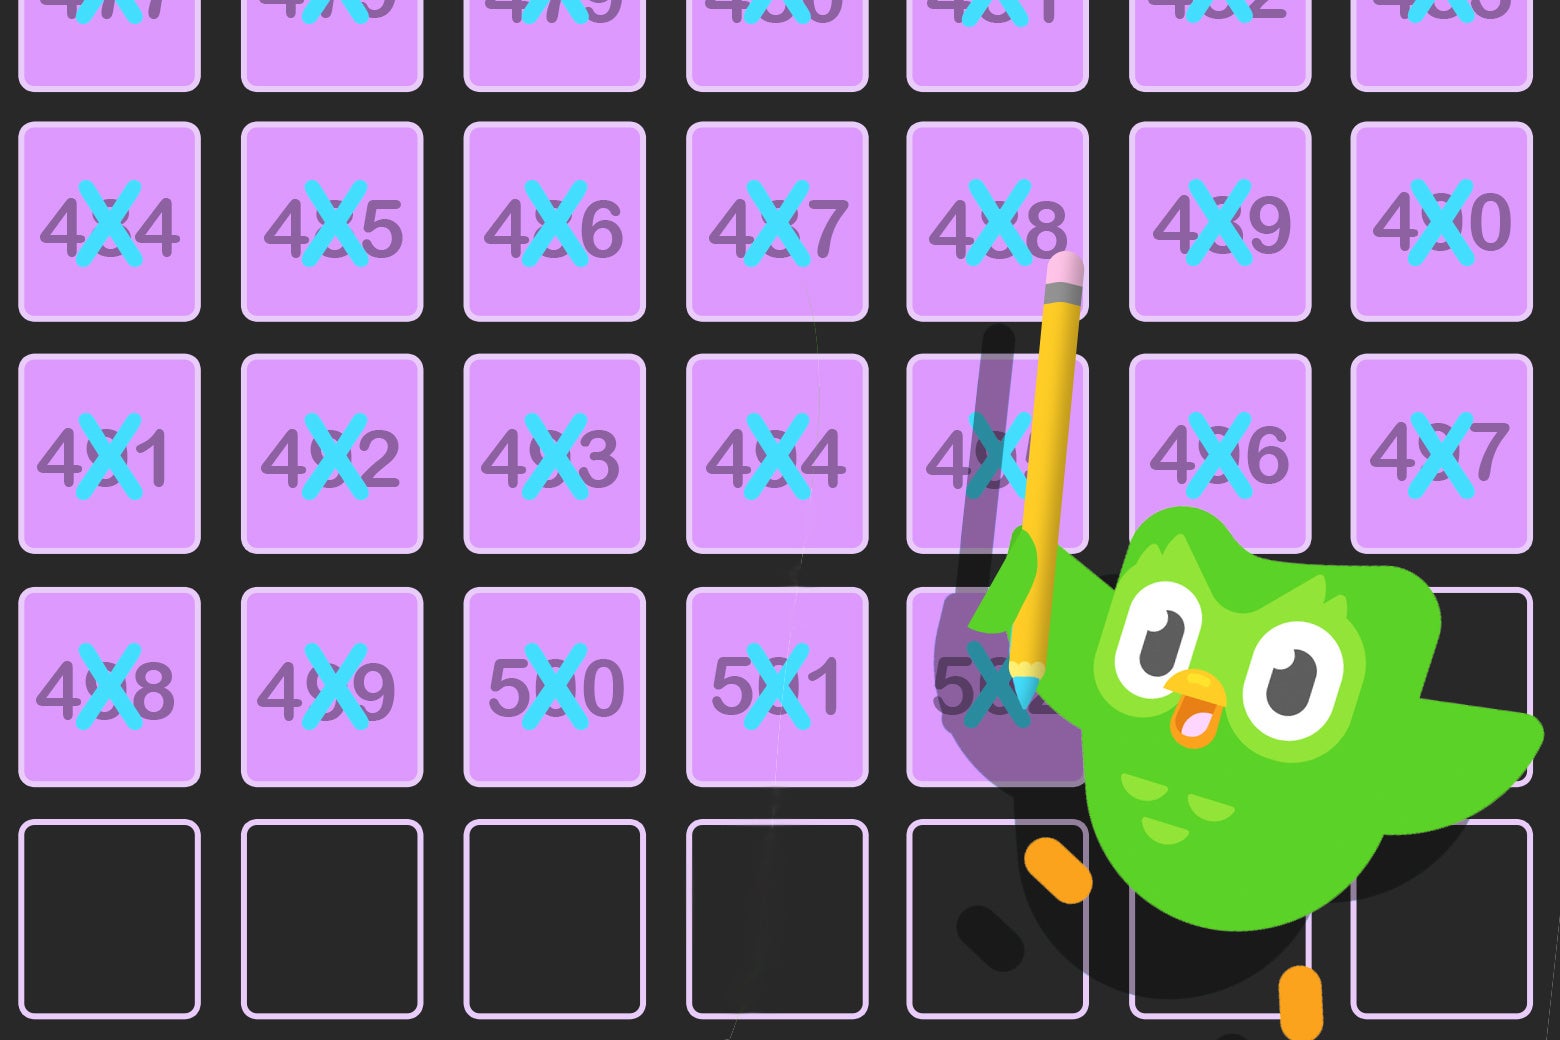 The green Duolingo owl mascot gleefully holds a pencil and stands in front of a board displaying the user's Duo streak: 502 days.